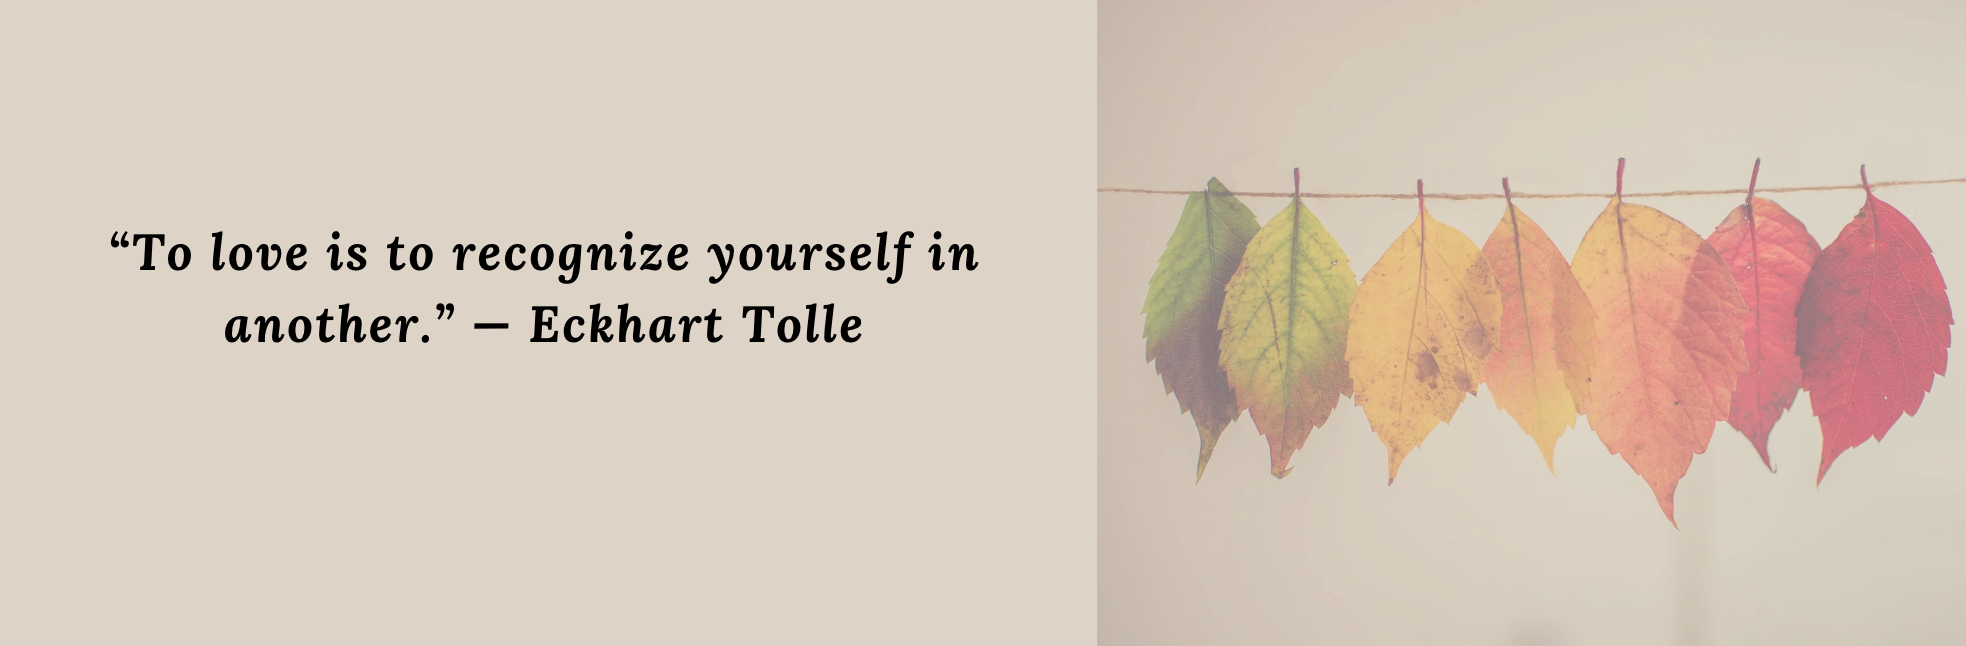 “To love is to recognize yourself in another.” — Eckhart Tolle